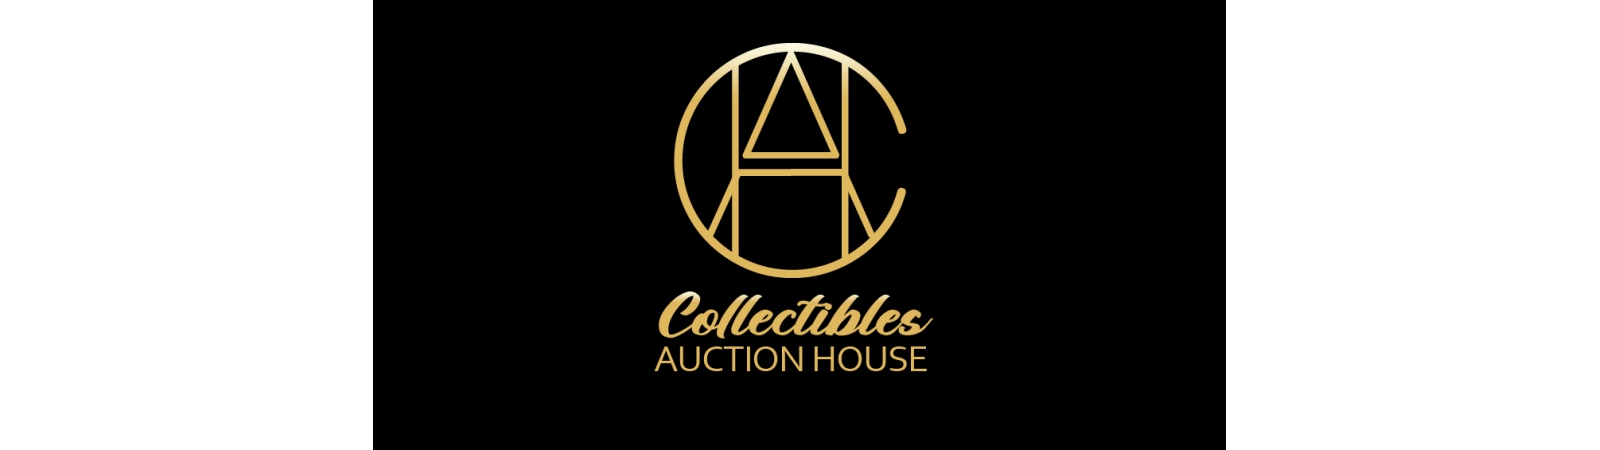 Collectibles Auction House | Auction Ninja